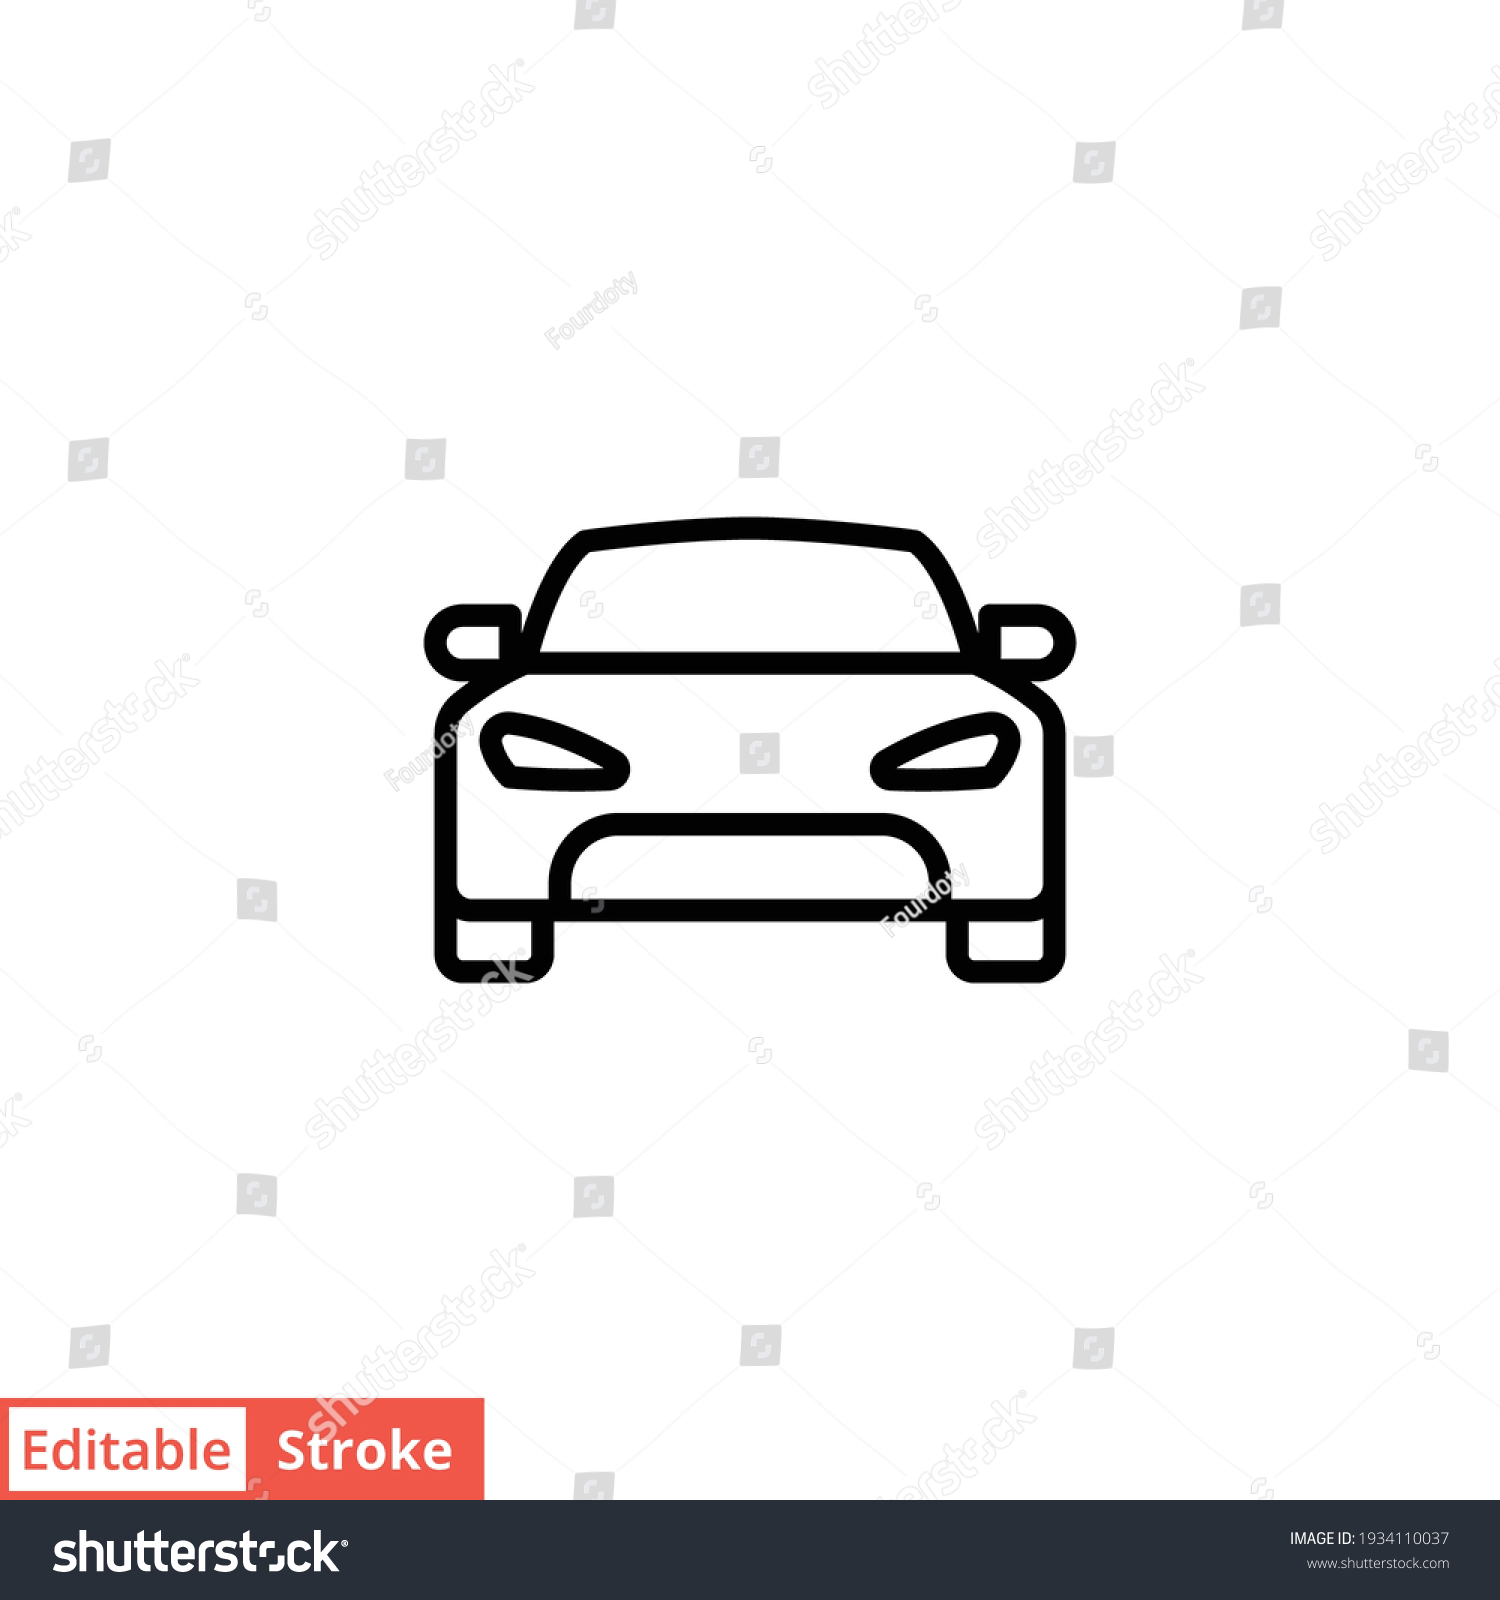 Car front line icon. Simple outline style sign symbol. Auto, view, sport, race, transport concept. Vector illustration isolated on white background. Editable stroke EPS 10. #1934110037